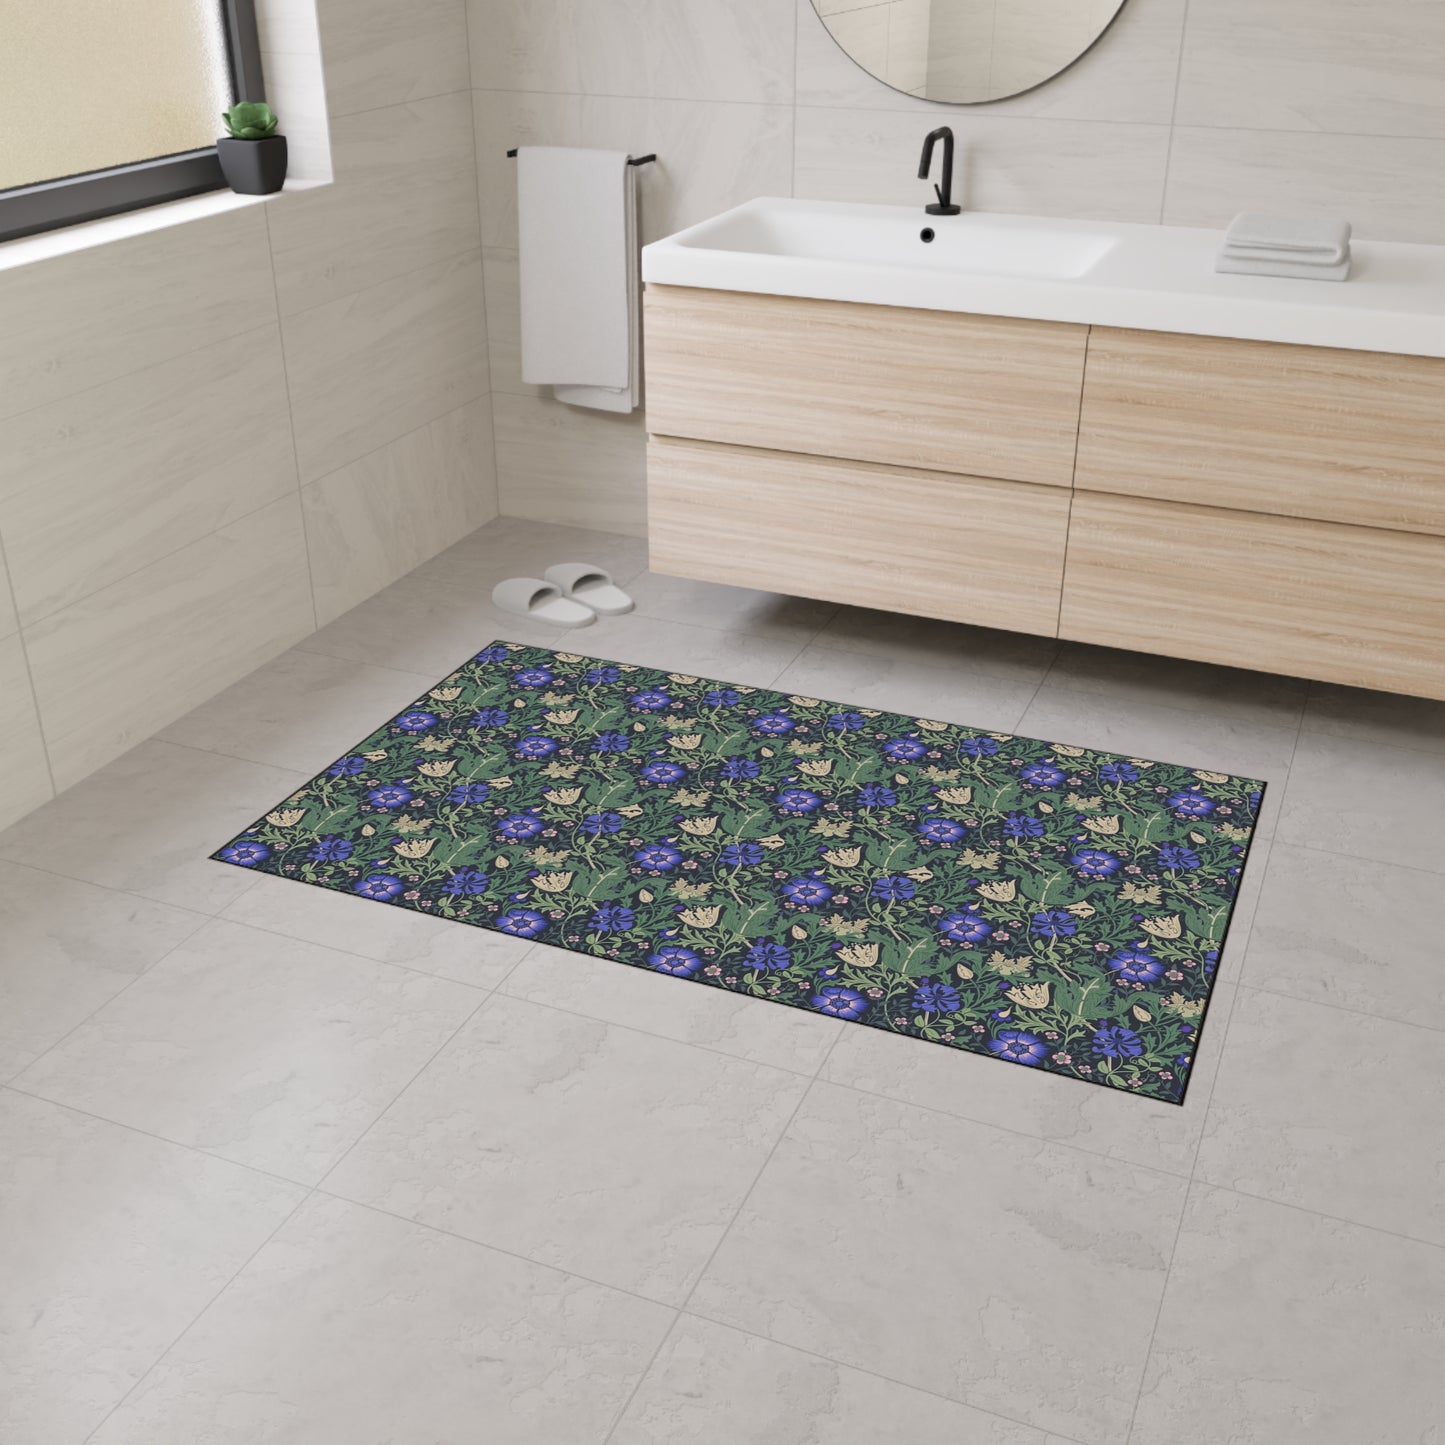 william-morris-co-heavy-duty-floor-mat-compton-collection-bluebell-cottage-14